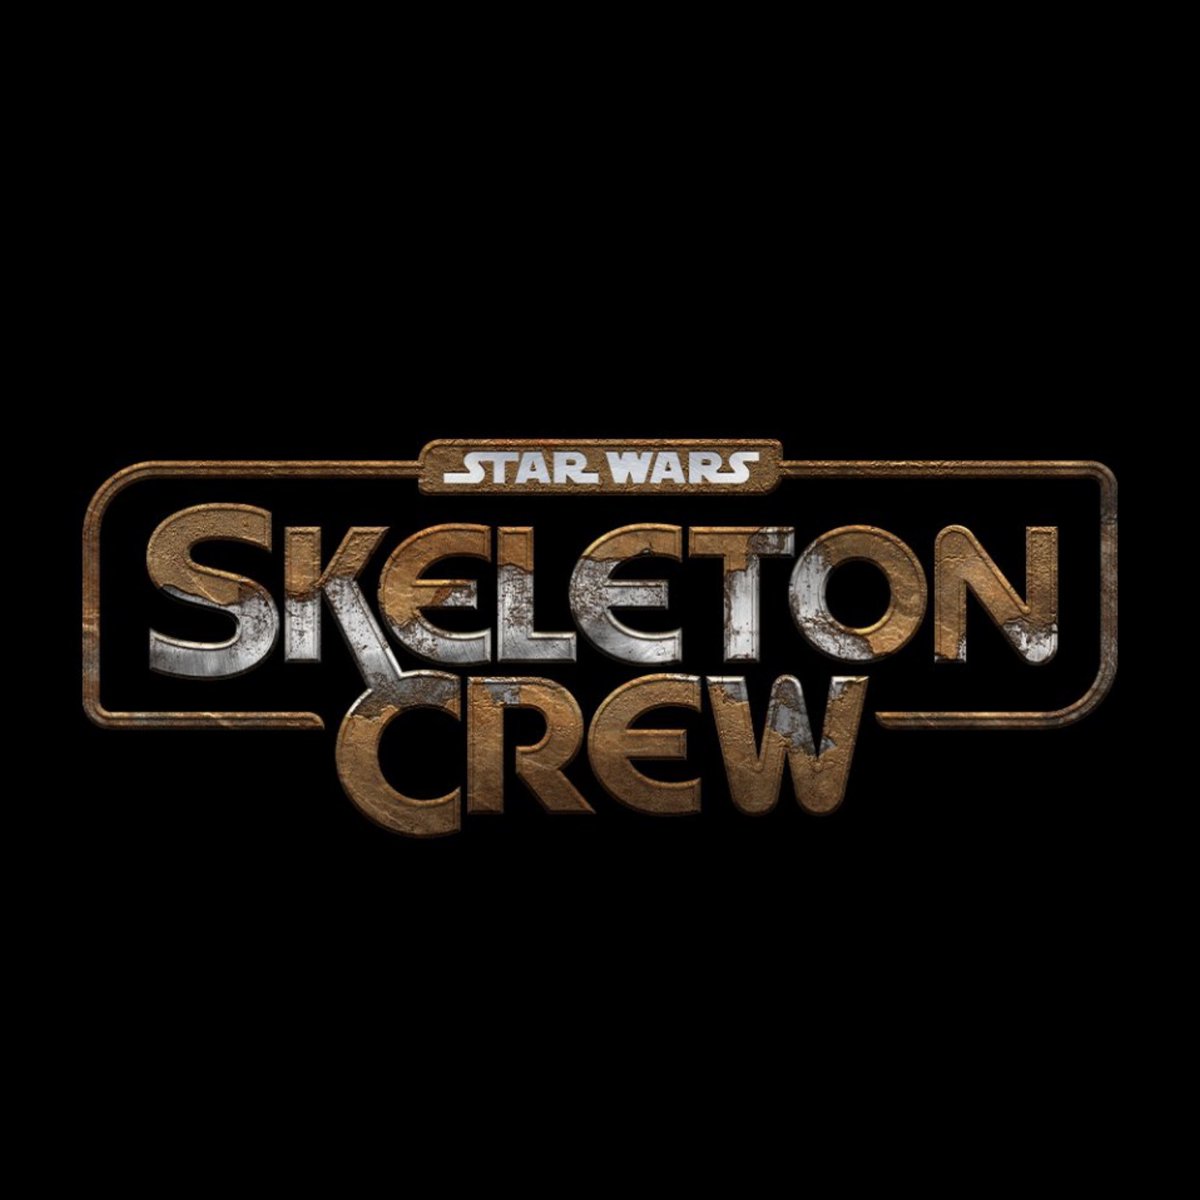 ‘STAR WARS SKELETON CREW’ will use stop-motion done by Phil Tippett as well as “old-fashioned matte paintings” made by an ILM painter who came out of retirement for the series.

(Source: collider.com/star-wars-skel…)